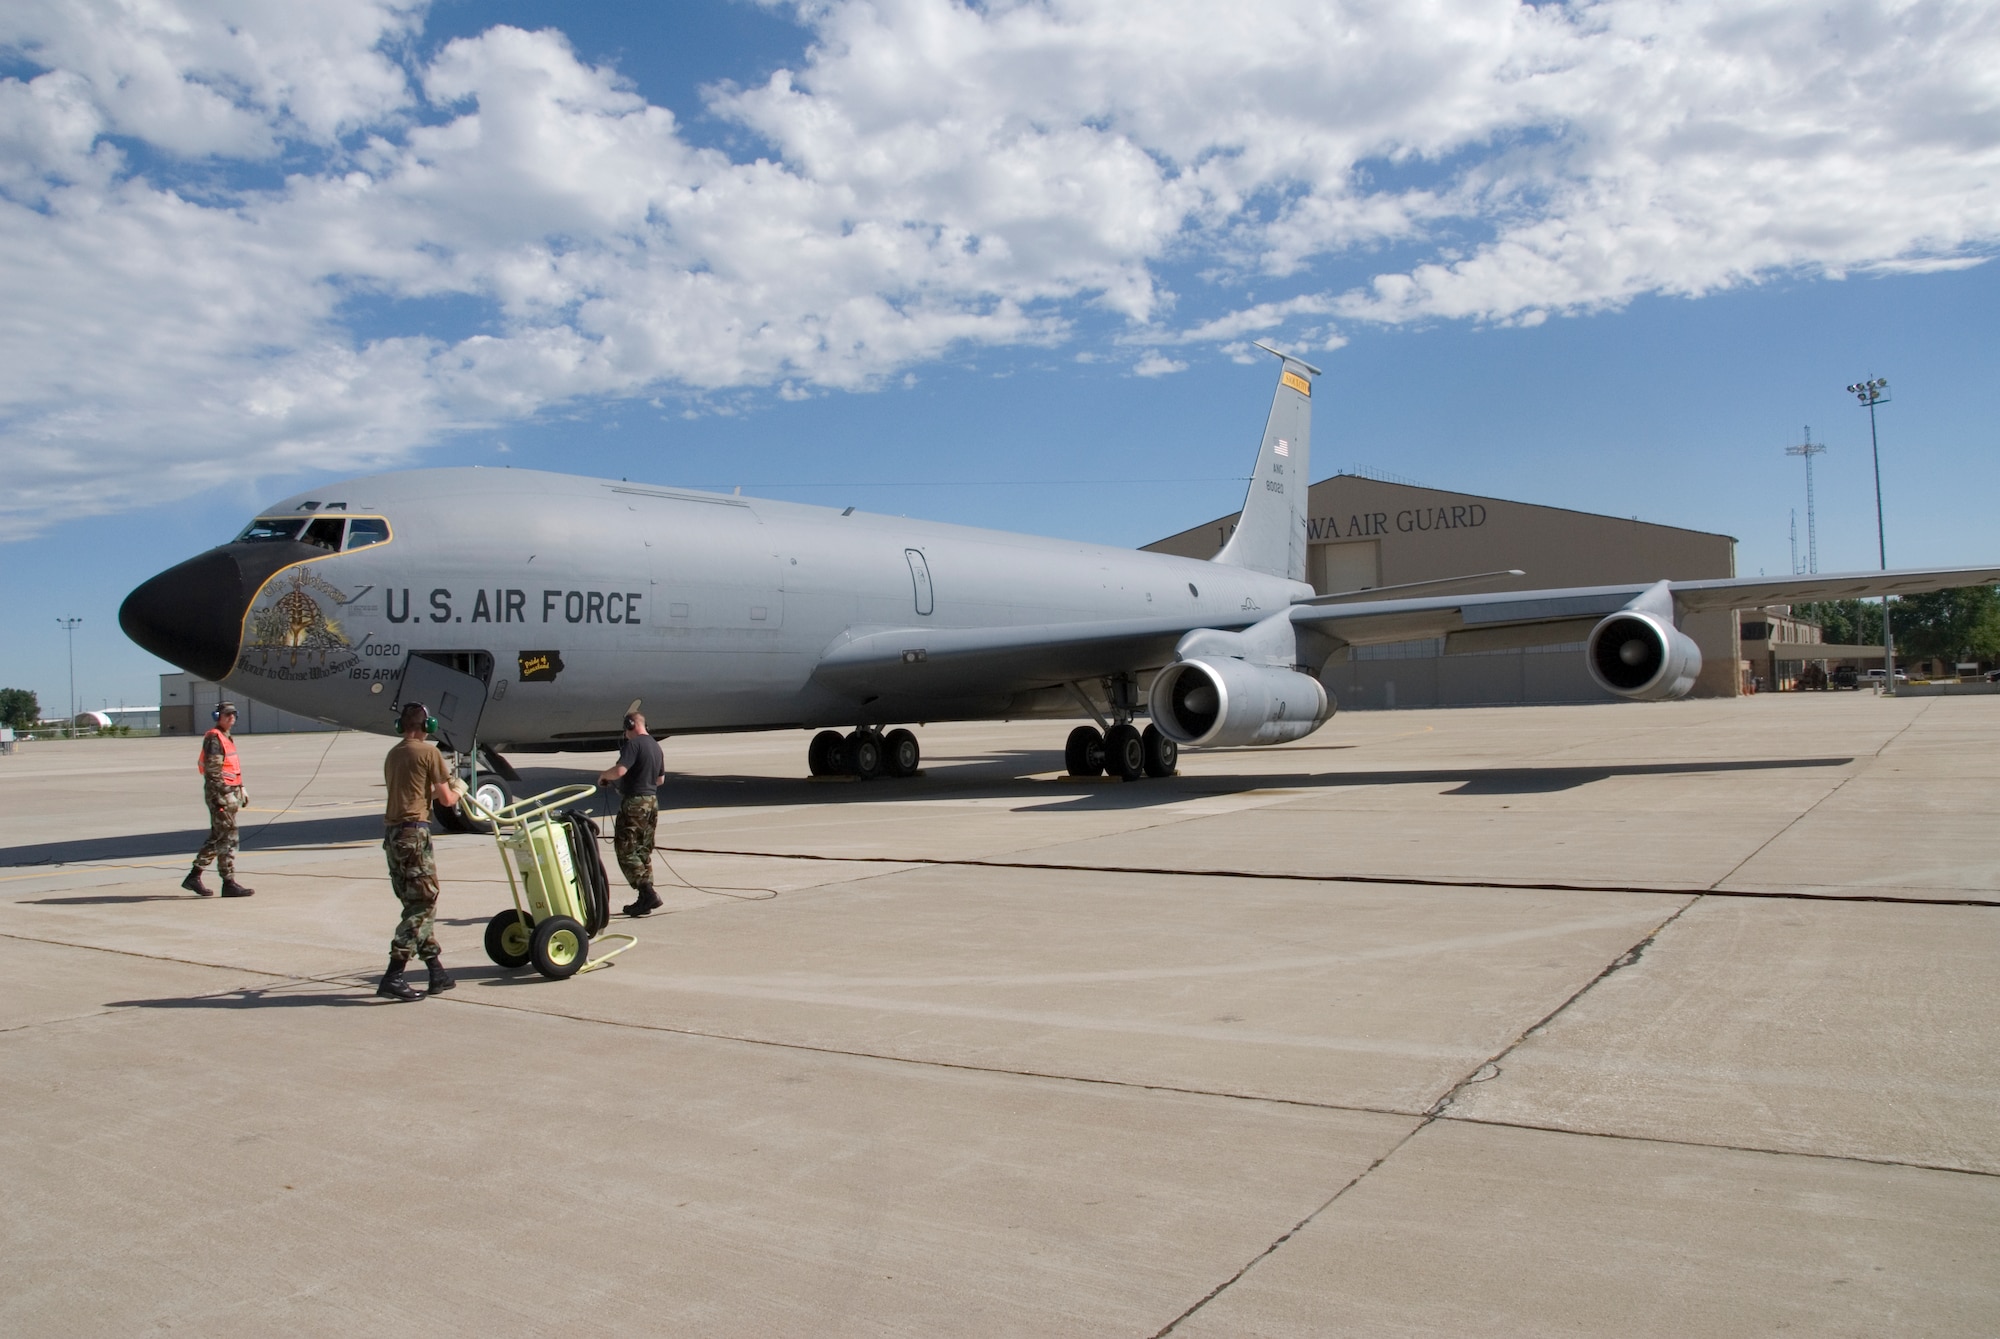 -June 10 2008, the last KC-135 ?E? model (The Veteran) decorated with nose art depicting the Vietnam memorial. The aging KC-135 left the 185th Air Refueling Wing, Iowa Air National Guard, in Sioux City, to Davis-Monthan Air Force Base, Arizona. where it will likely be retired. The 185th has completed its conversion to the newer KC-135 ?R? model.
Official Air Force Photo by:  SSG Oscar M. Sanchez
